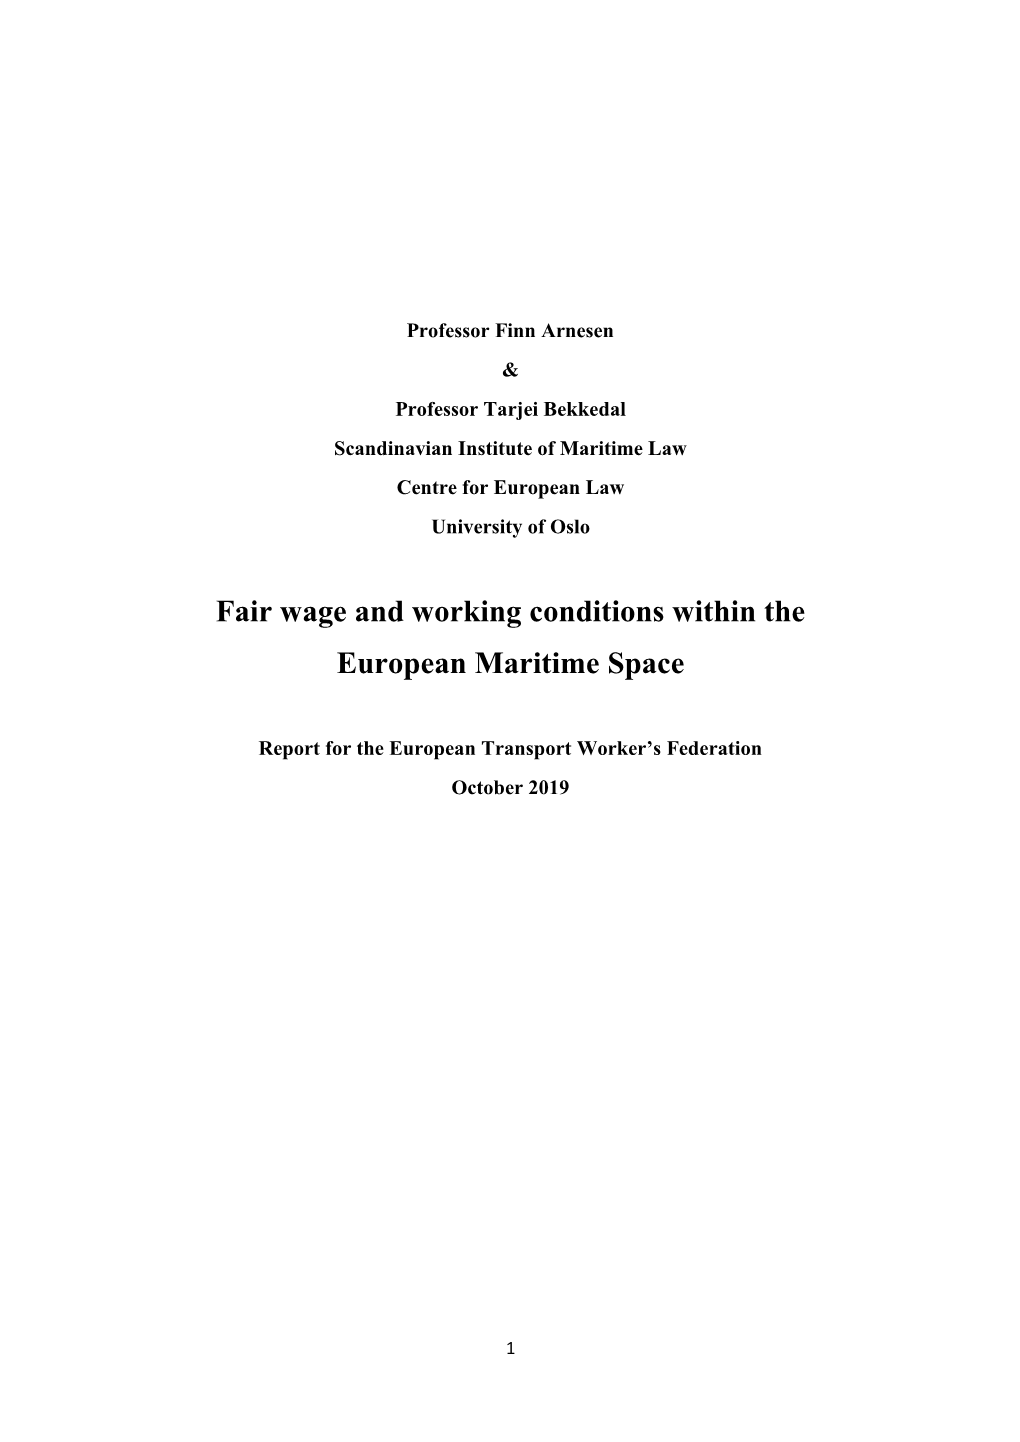 Fair Wage and Working Conditions Within the European Maritime Space